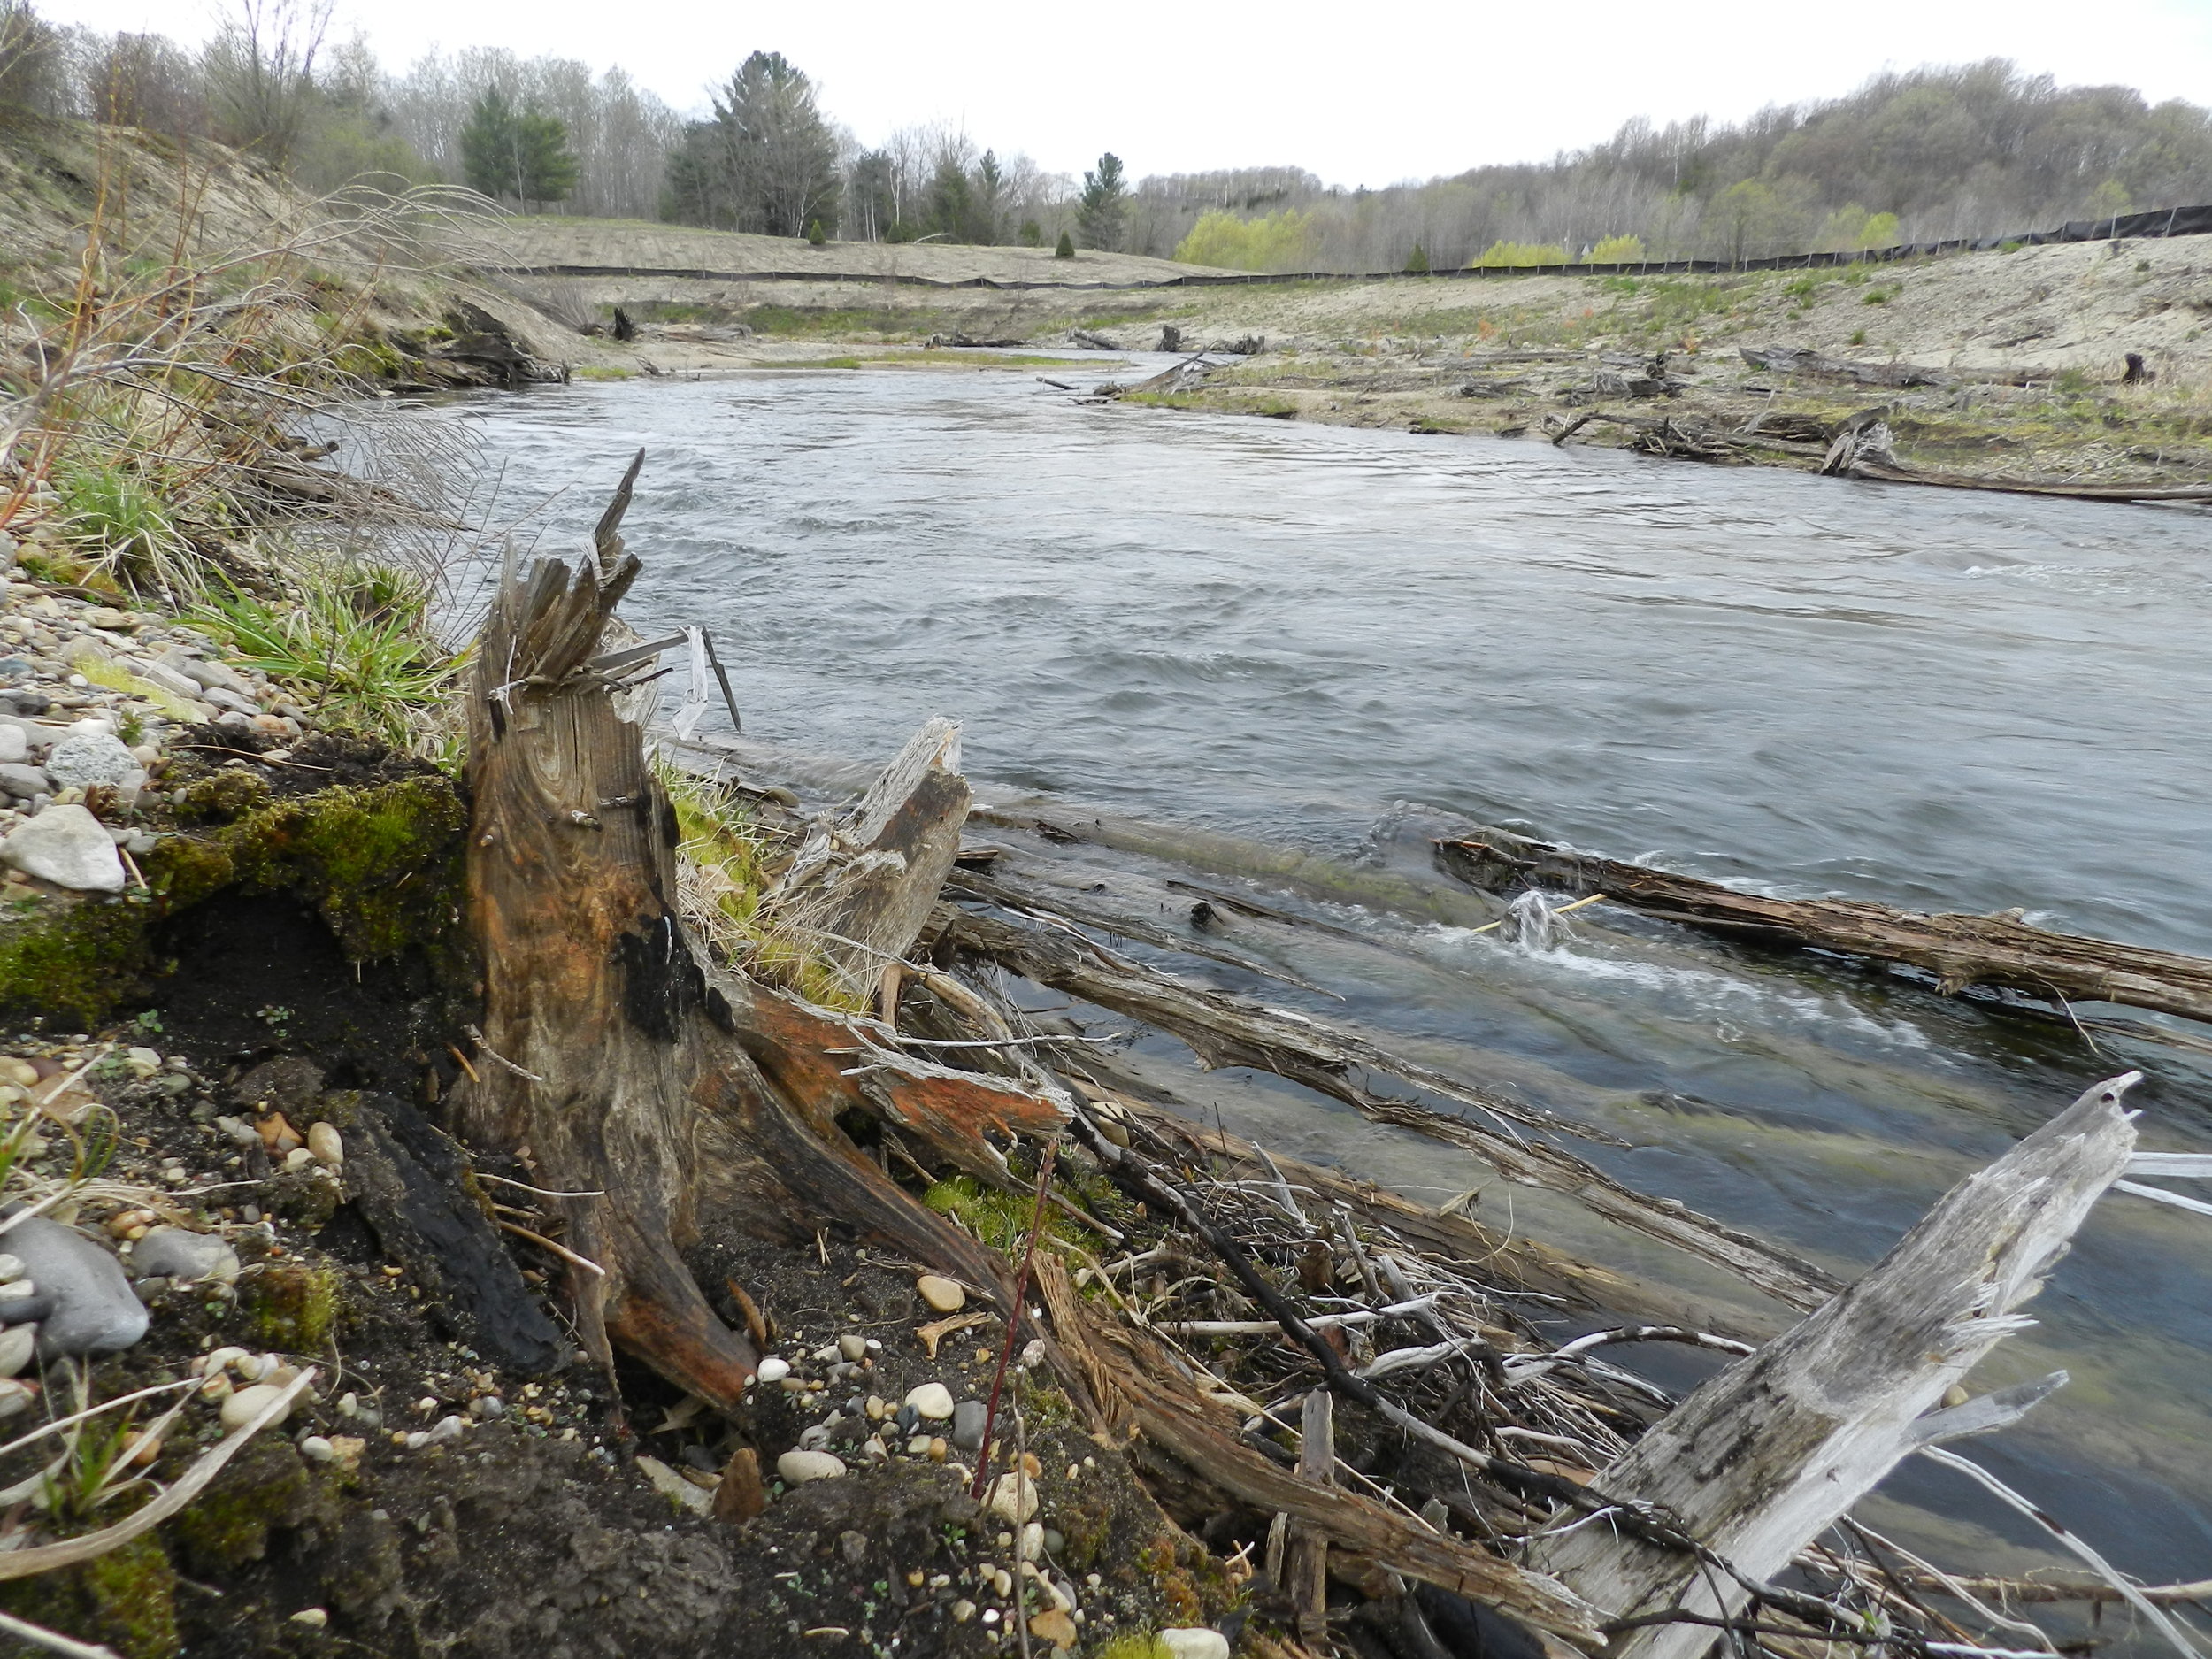 Post-dam removal: stumps and wood are exposed from the channel prior to dam construction